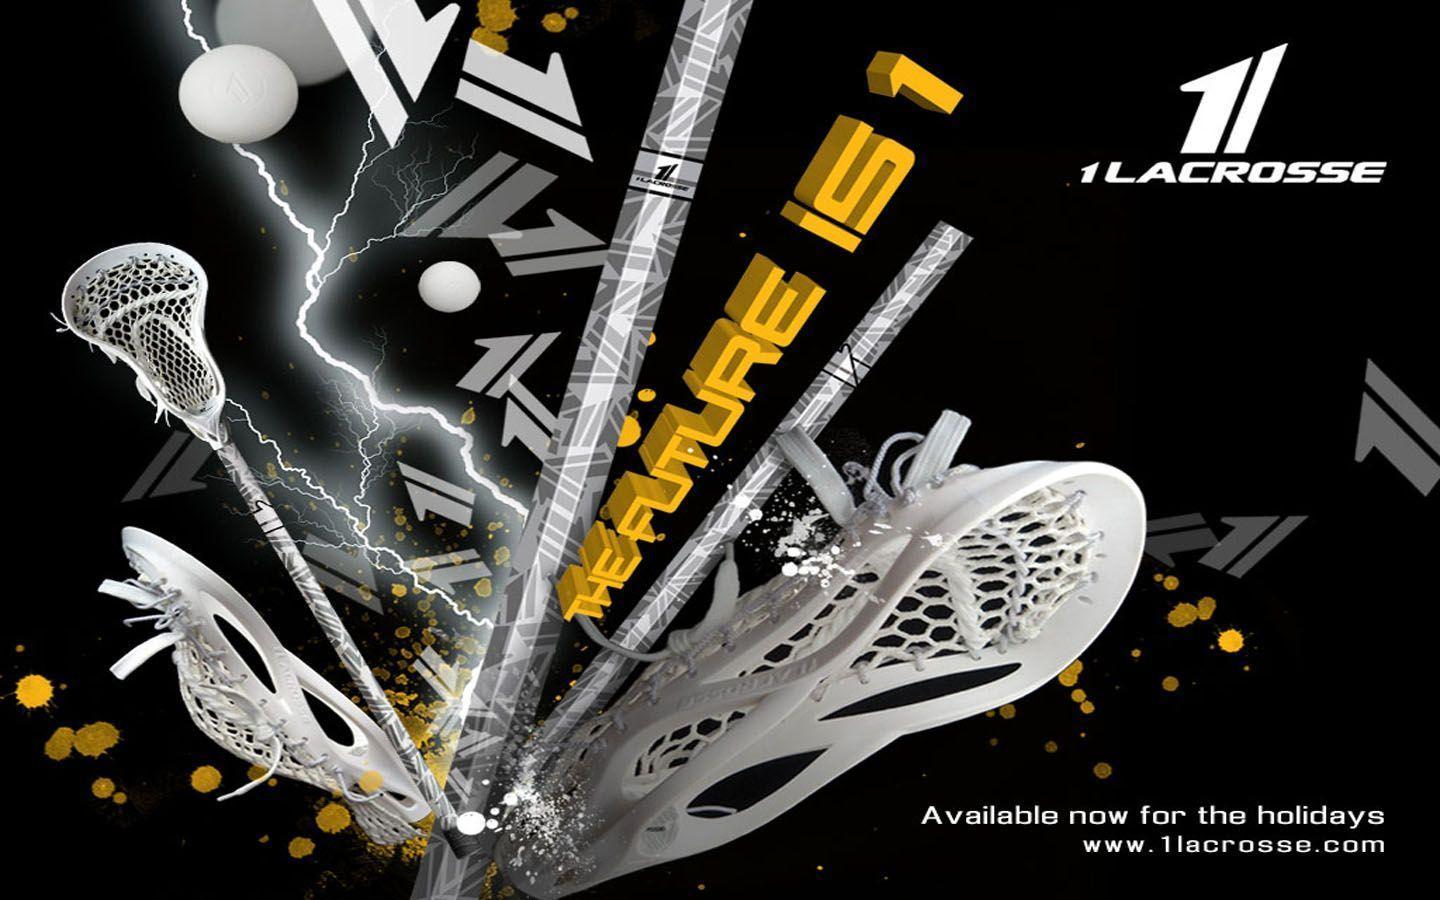 Lacrosse-wallpaper 151347 - Lacrosse Wallpaper Hd , HD Wallpaper & Backgrounds